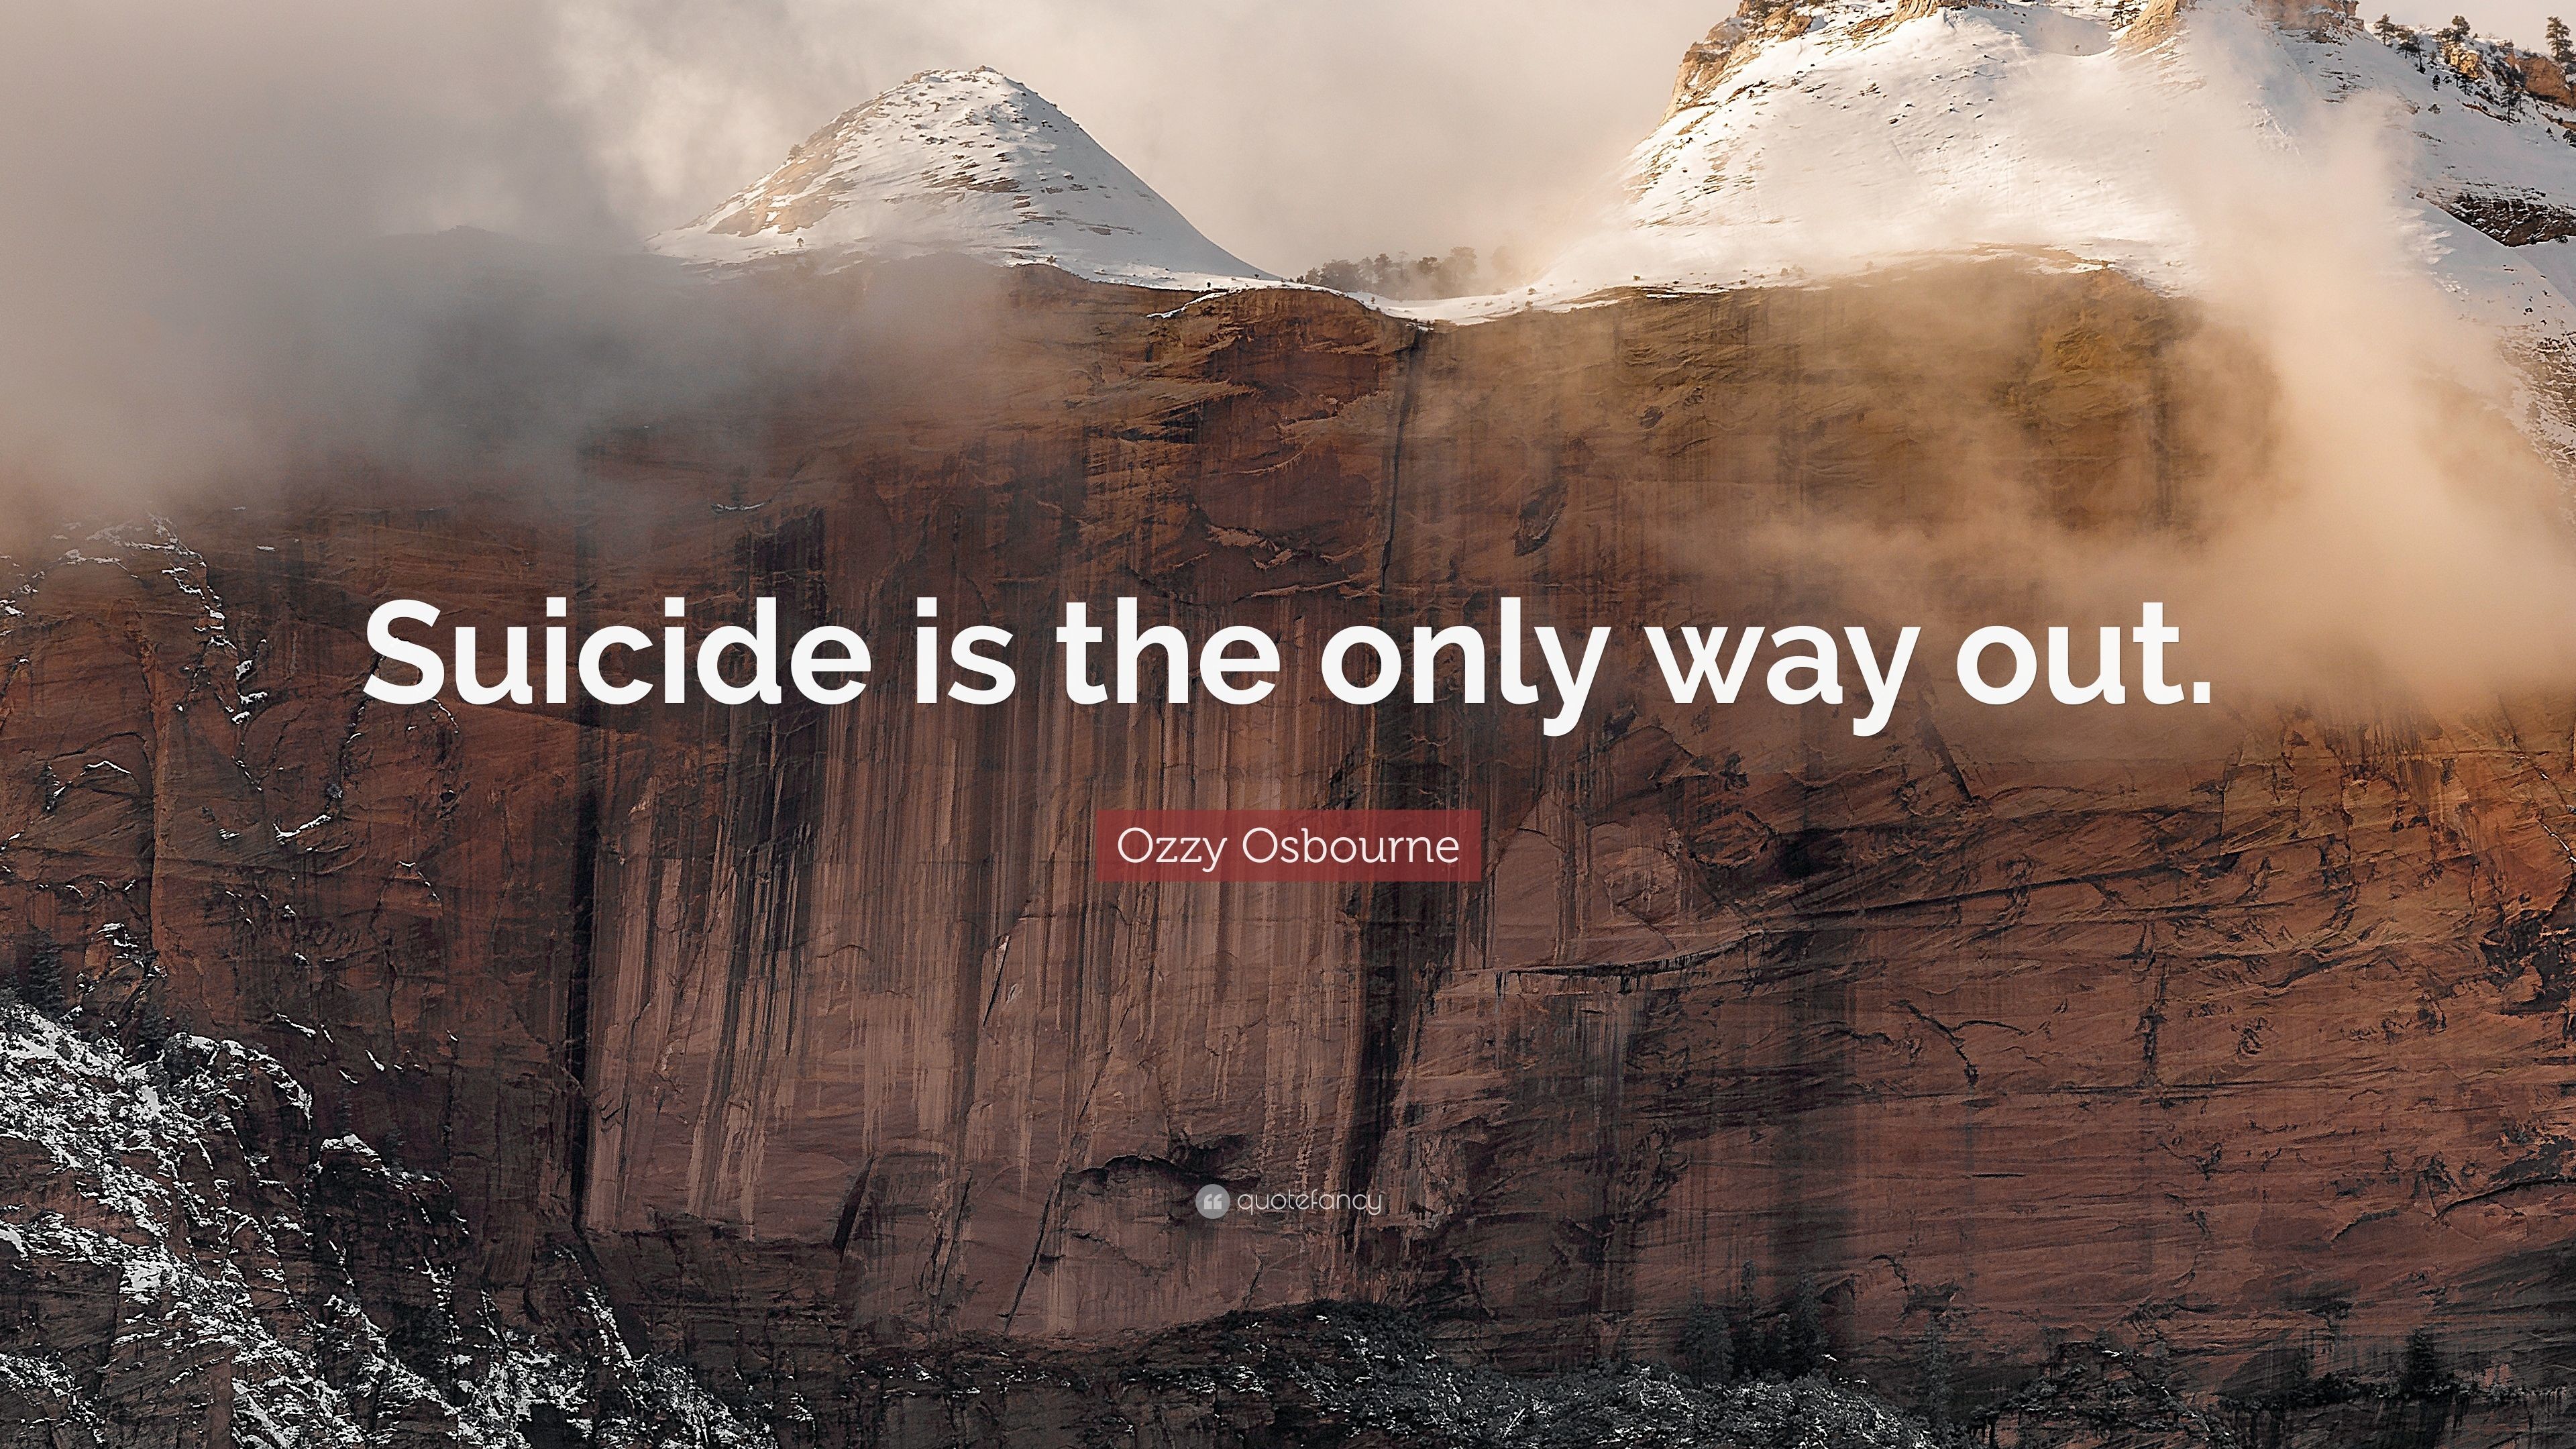 3840x2160 Ozzy Osbourne Quote: “Suicide is the only way out.”